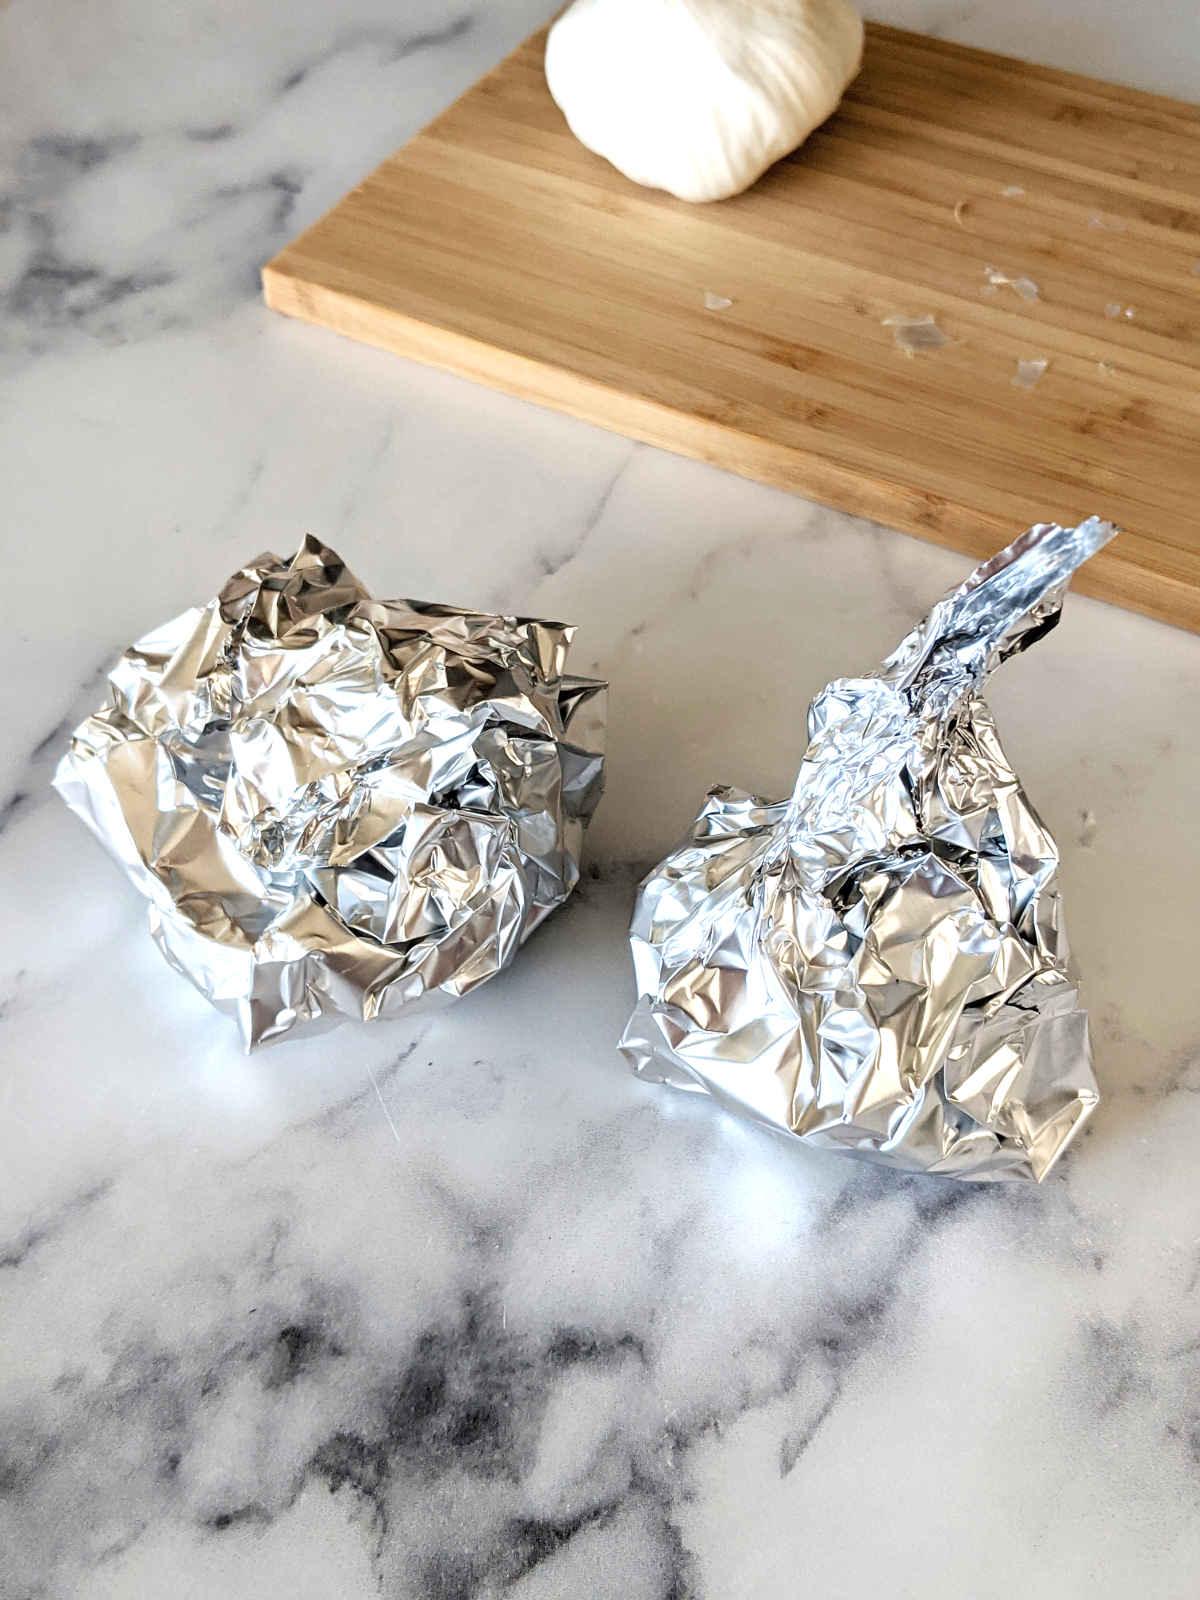 Garlic bulbs wrapped in foil.